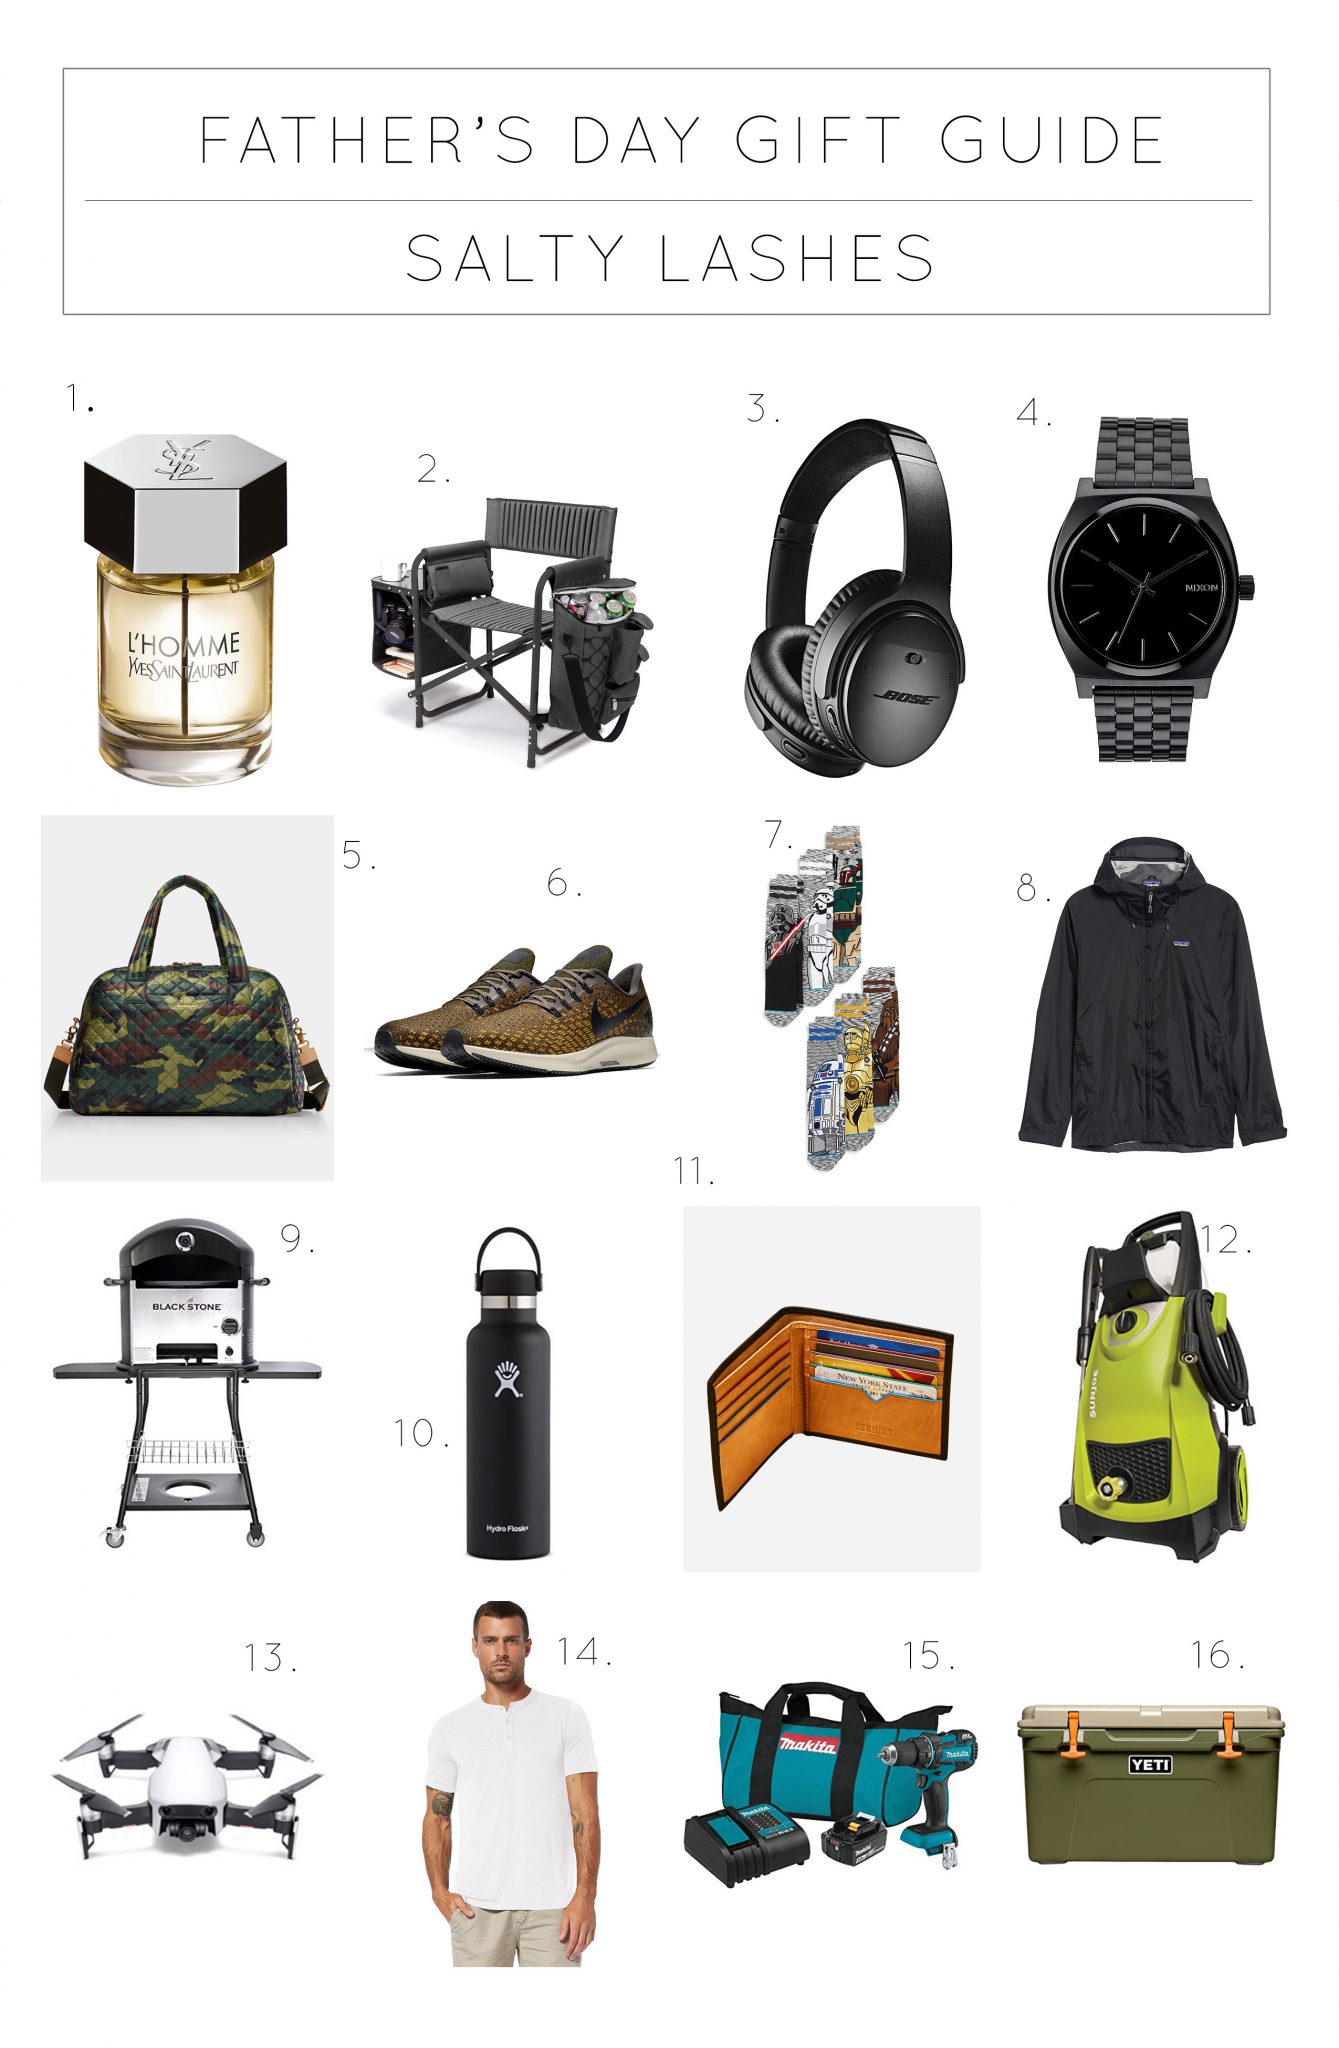 Father's Day Gift Guide: 16 Gift Ideas Perfect For Fathers Day